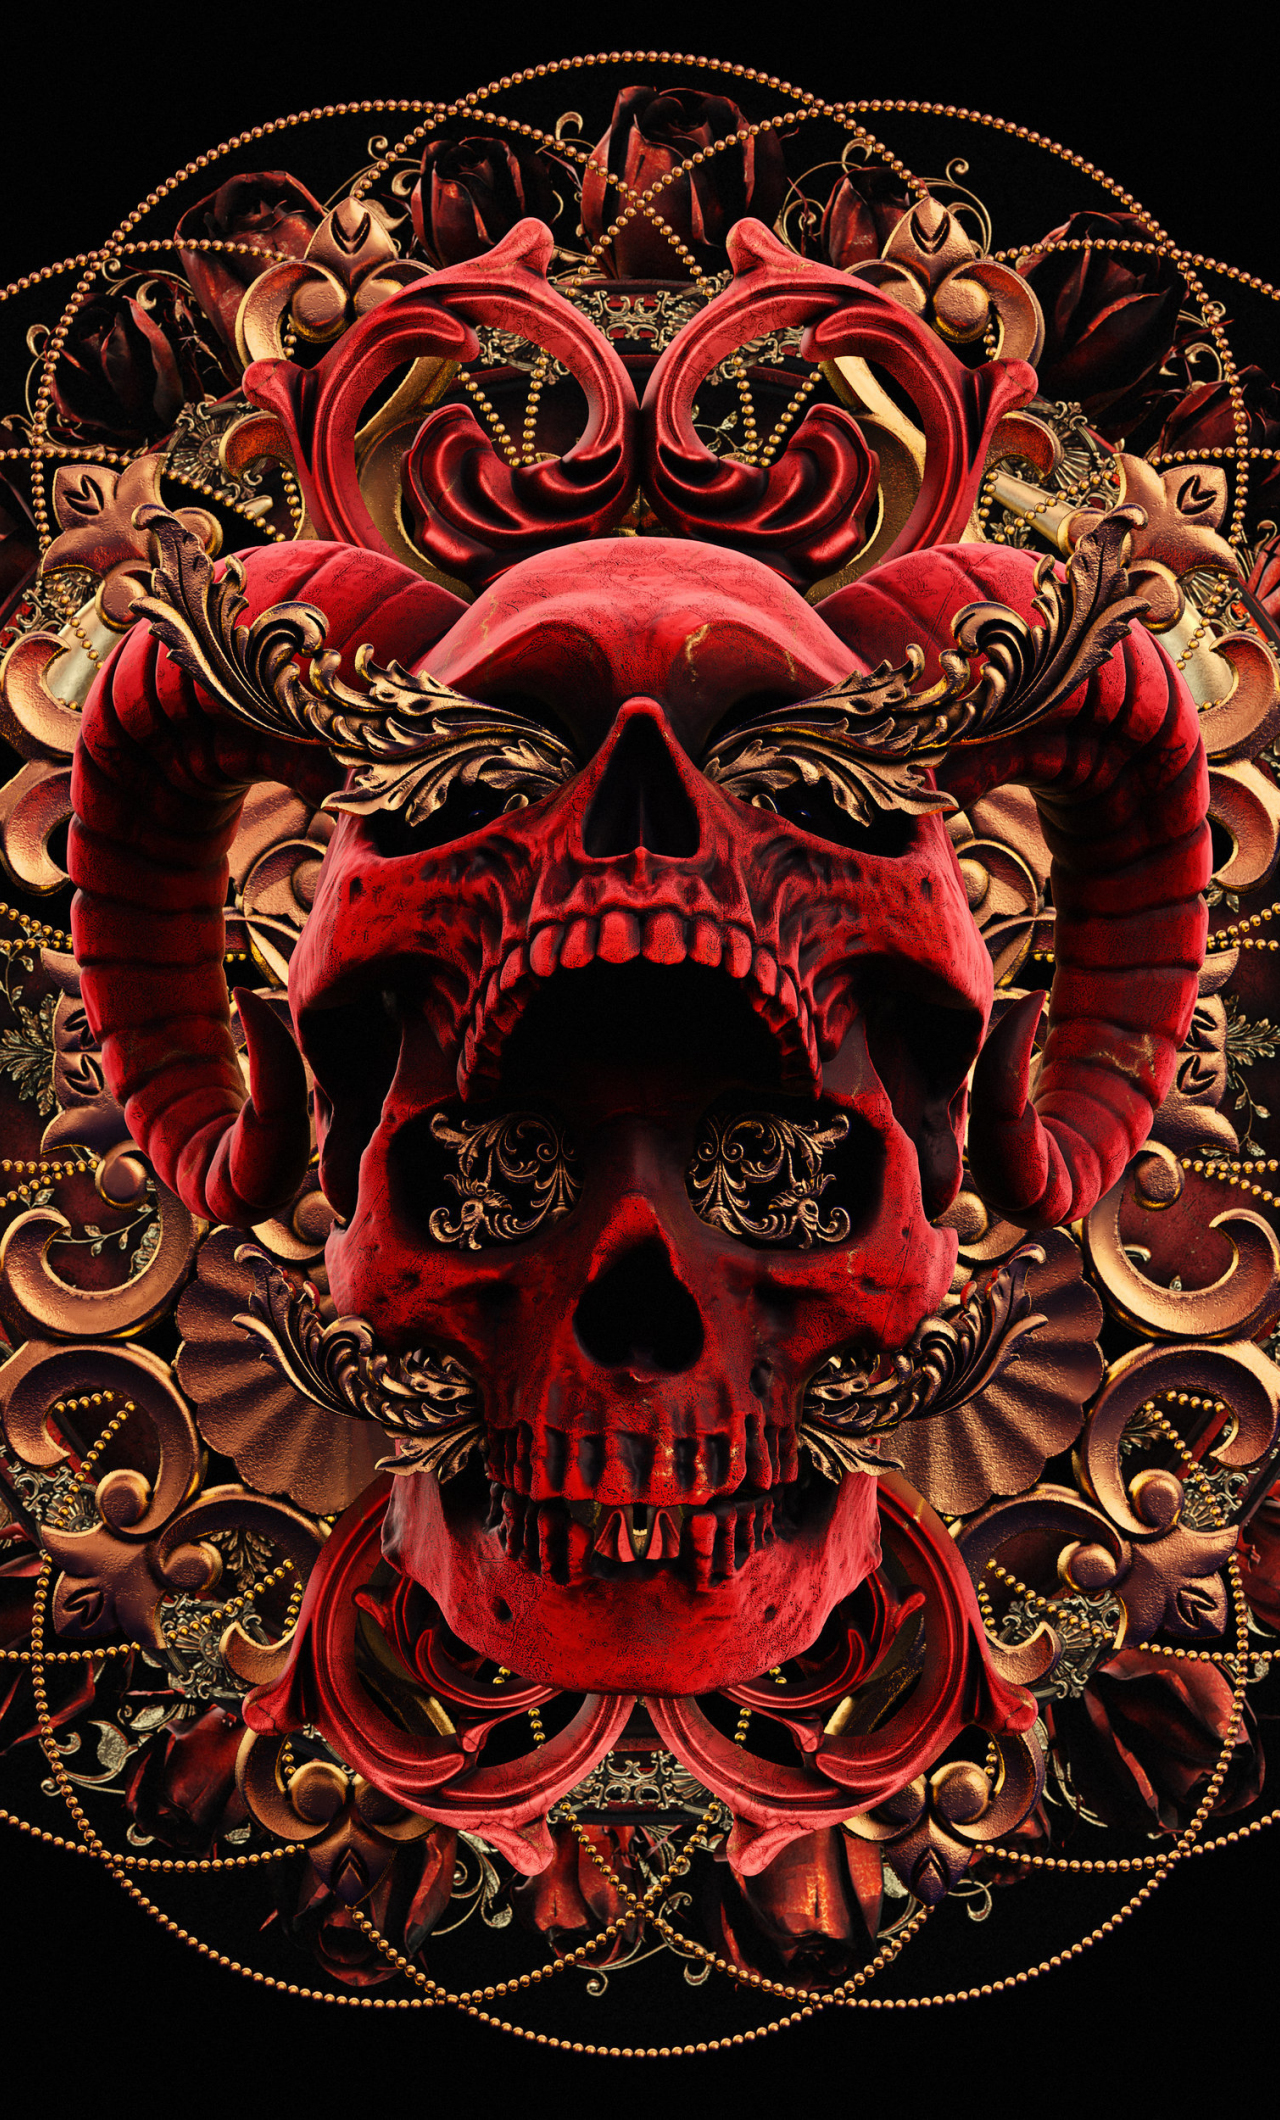 4k Android Skull Wallpapers - Wallpaper Cave